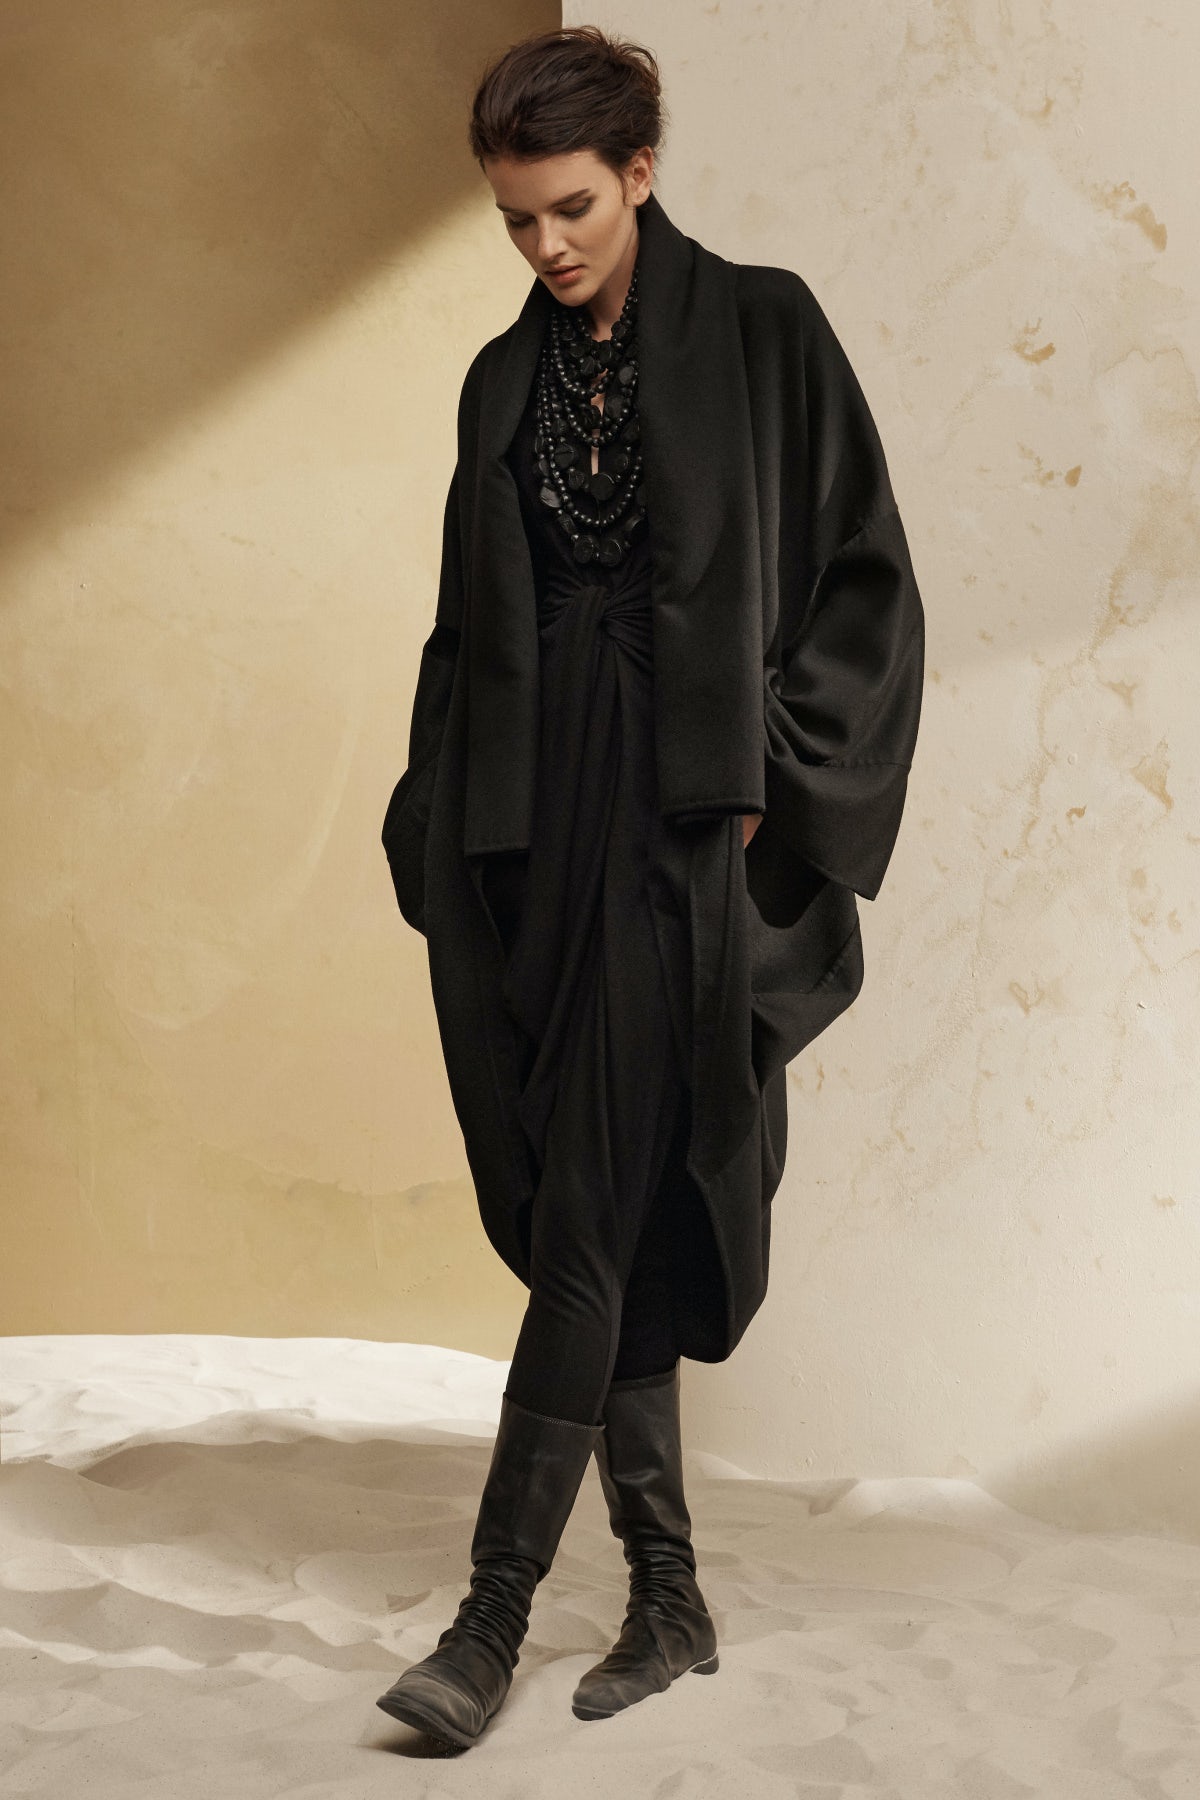 Donna Karan on Her See Now, Buy Now Line for Urban Zen